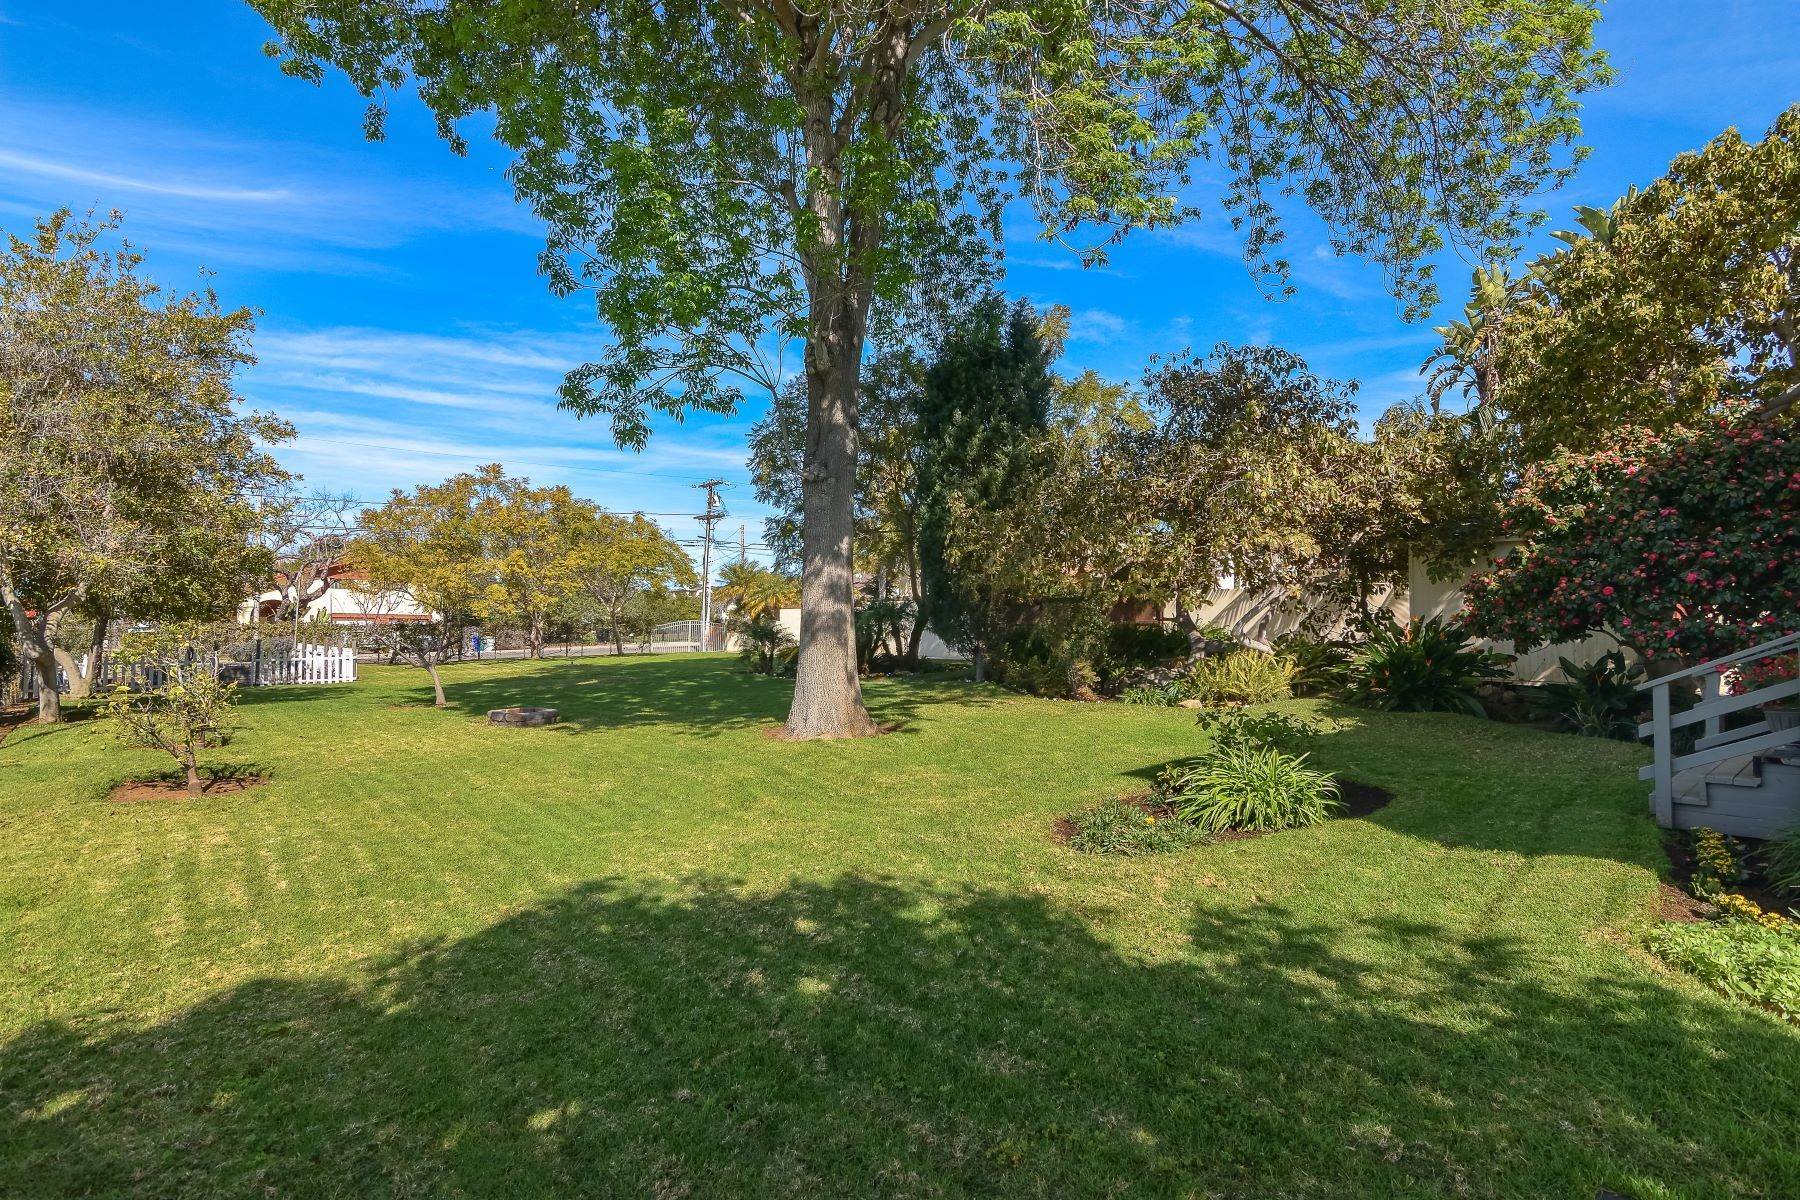 Land for Sale at Grecourt Way, Carlsbad, CA 92008 Grecourt Way, Carlsbad, CA 92008, Carlsbad, California 92008 United States